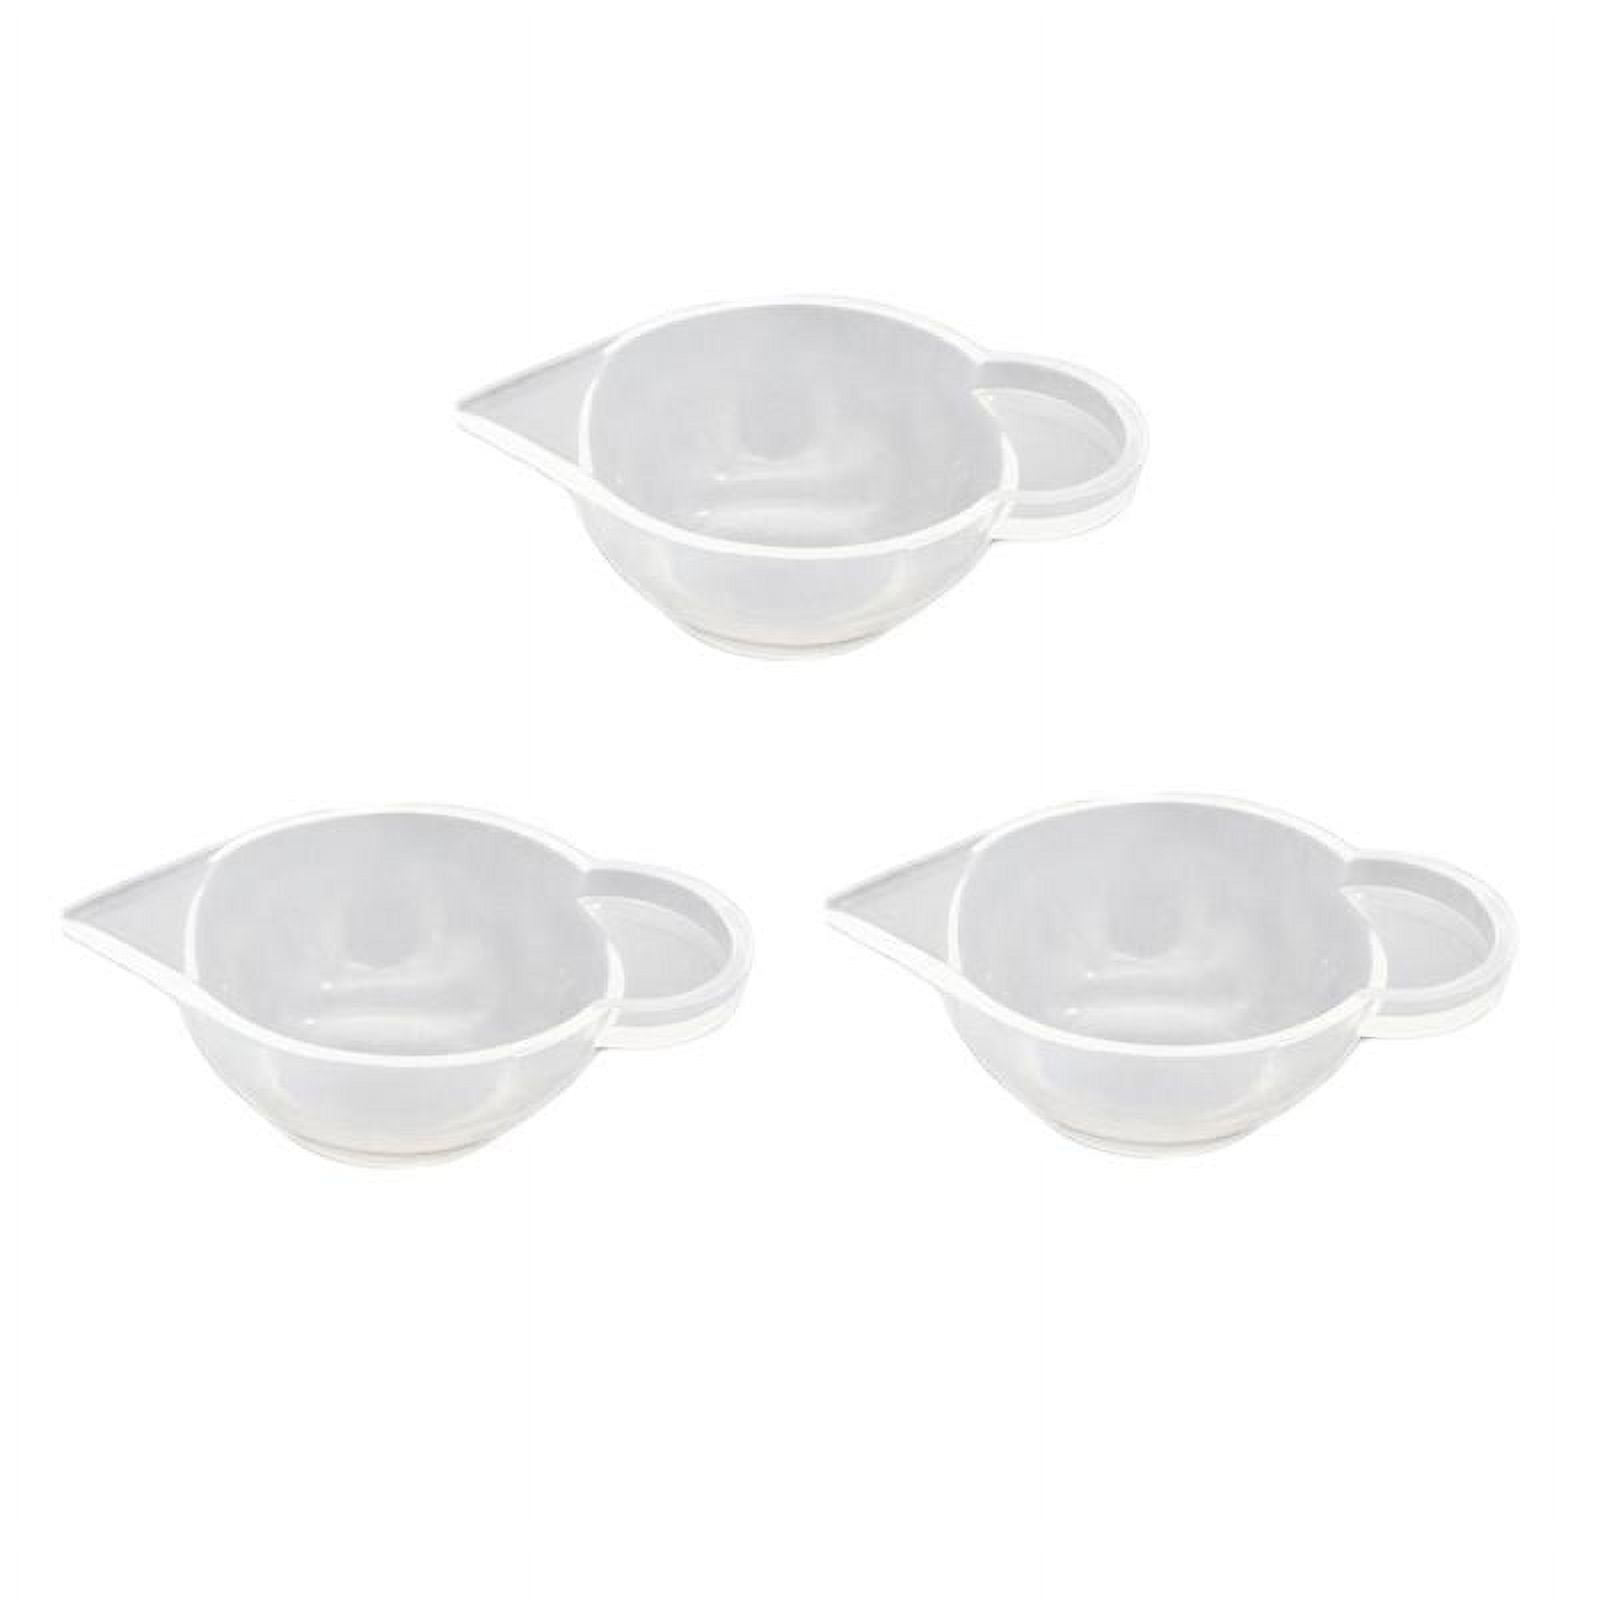 3pcs 100ml Silicone Measuring Cups for Resin, TSV Resin Mixing Cups Non-Stick, Reusable Mixing Cups for Epoxy Resin, Art, Waxing, Size: 100 mL, White